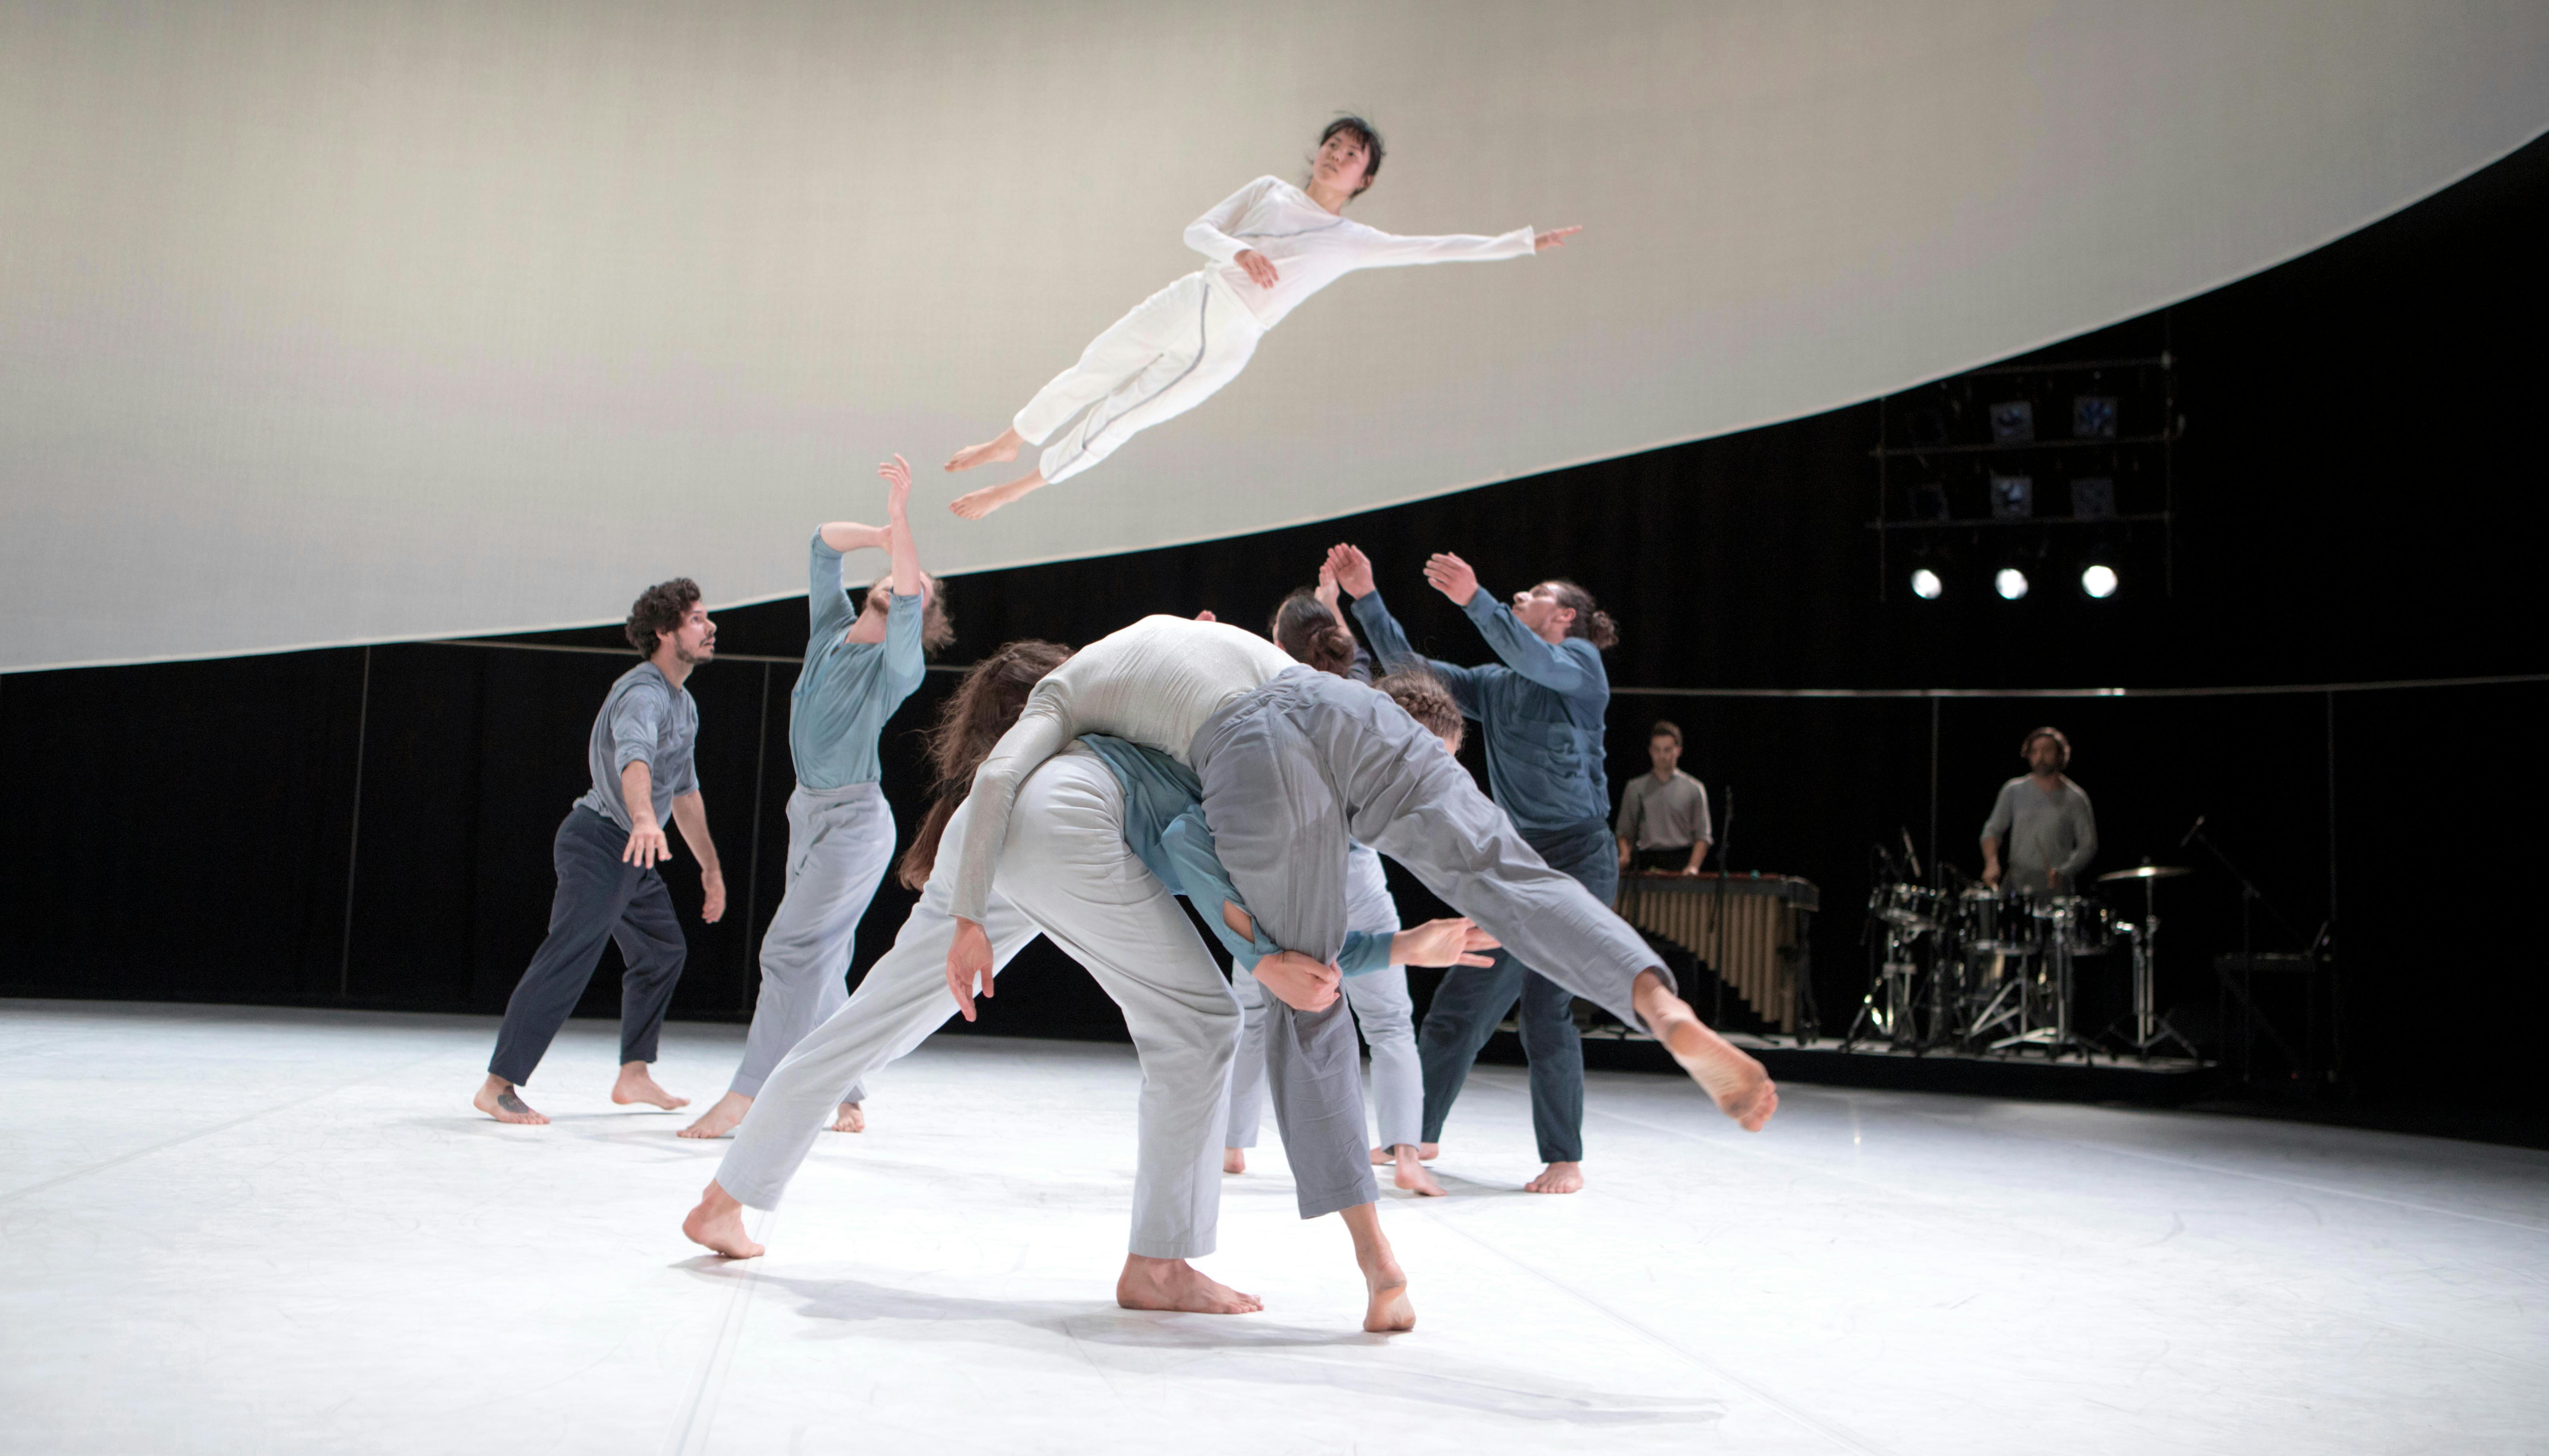 The artists perform wearing light-coloured garments 